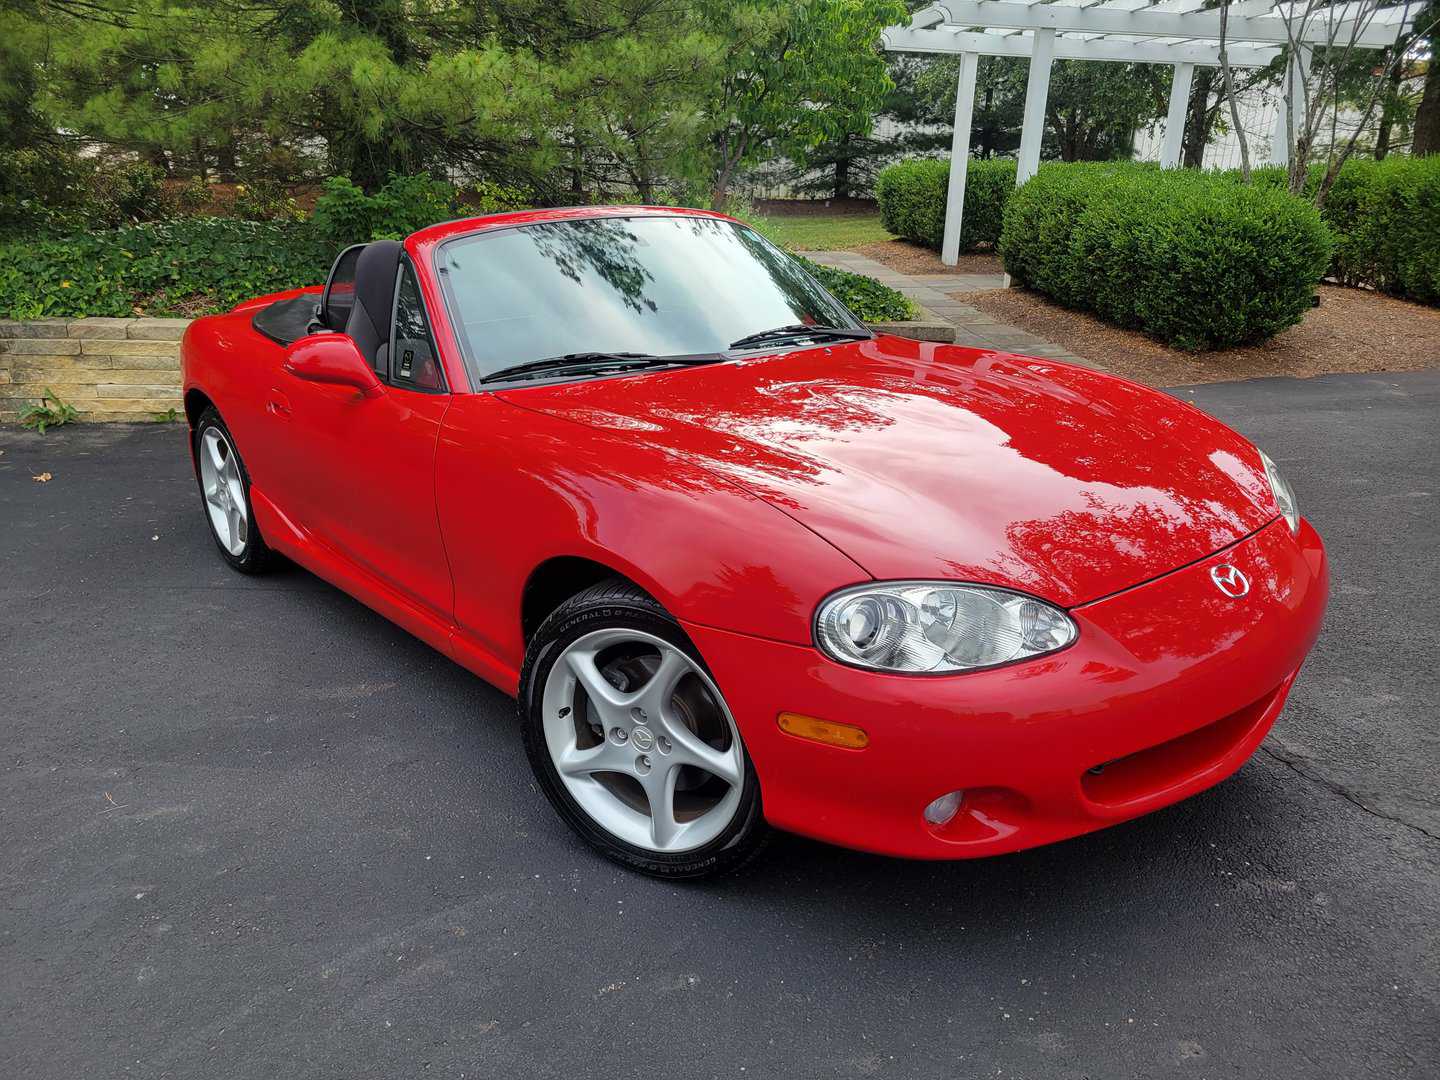 A red mazda mx-5 roadster is parked in a parking lot.